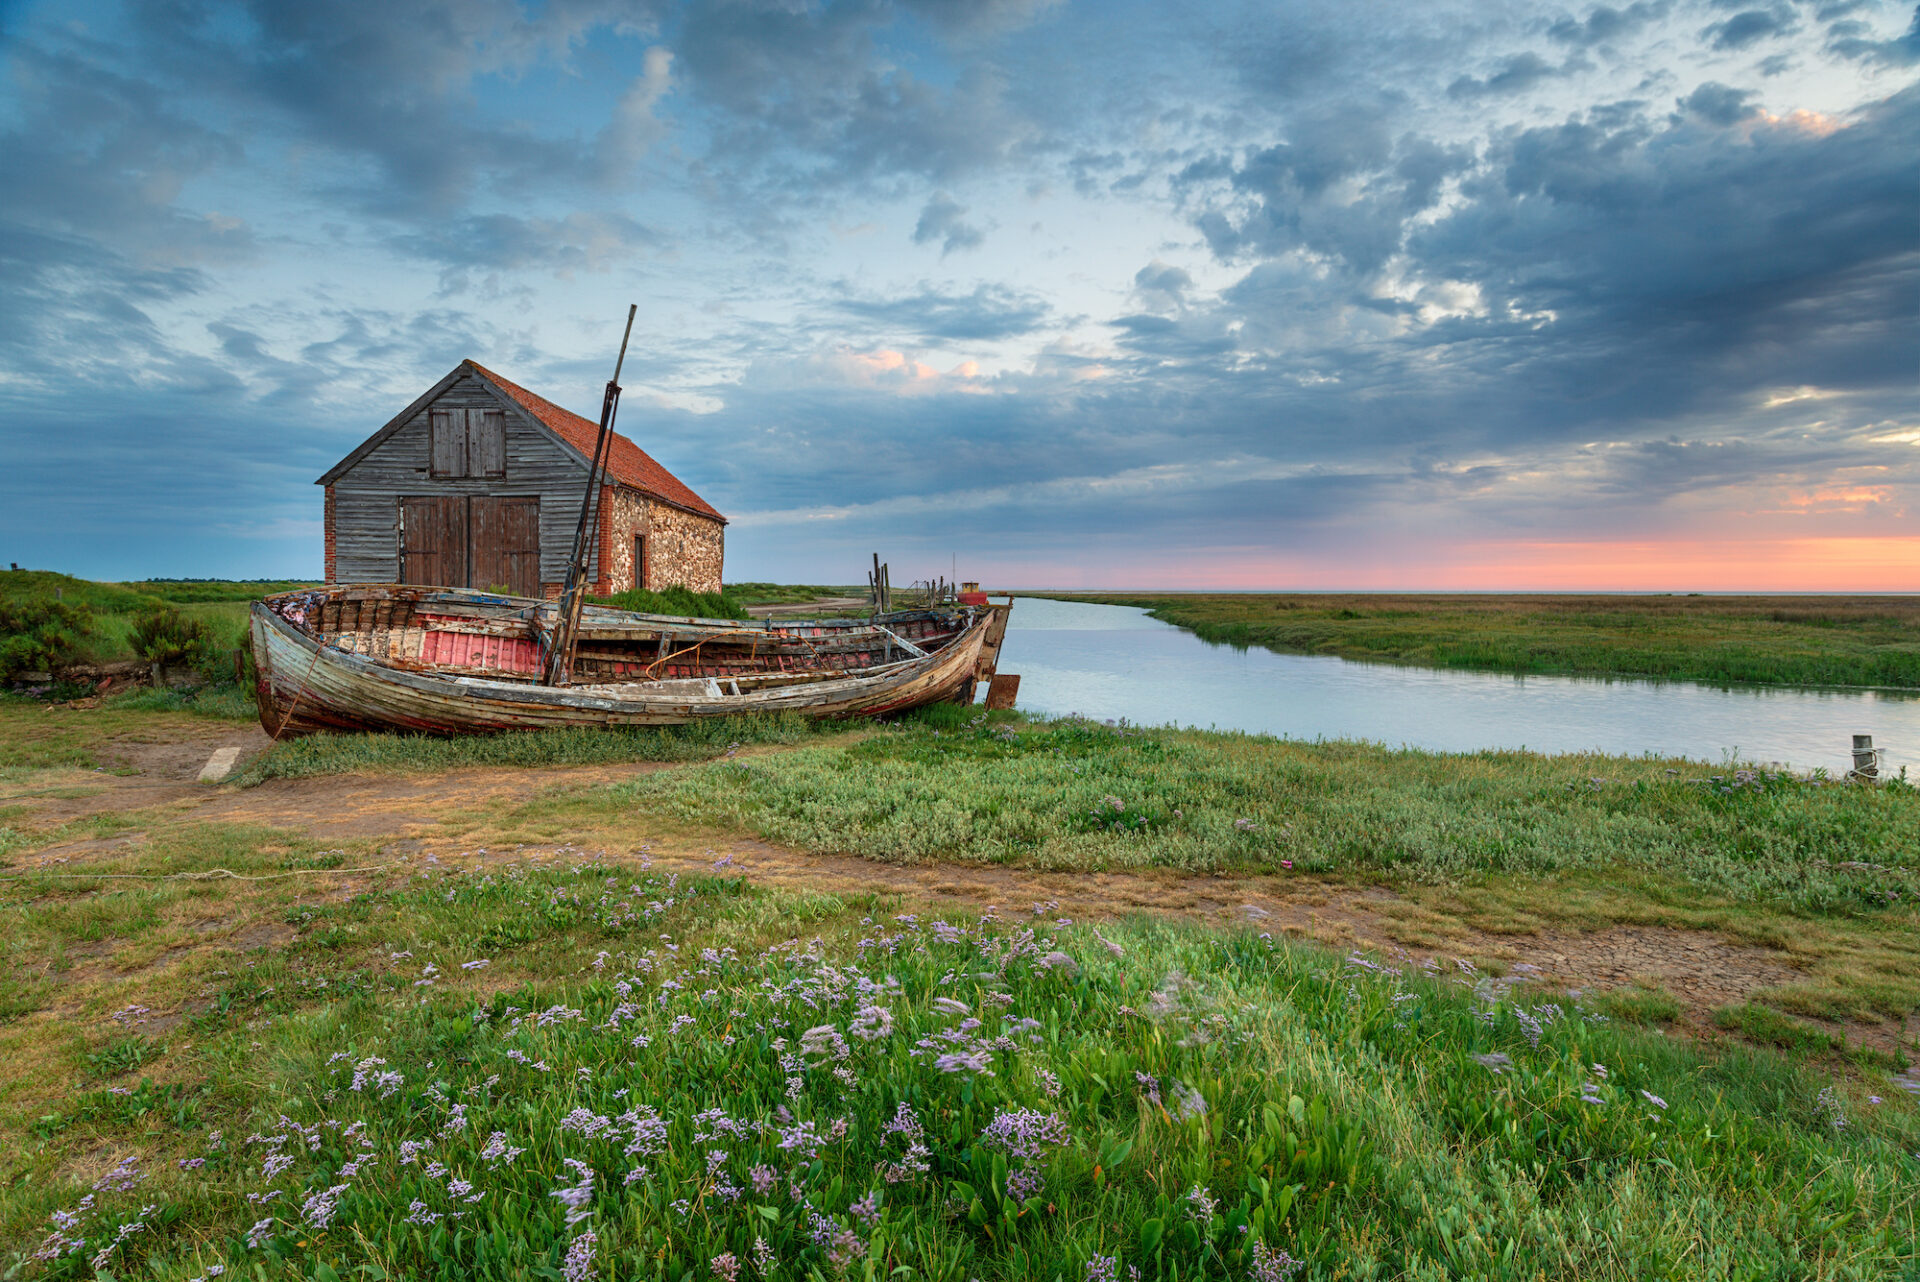 A grassy field with a barn and a boat and morning sky in the background